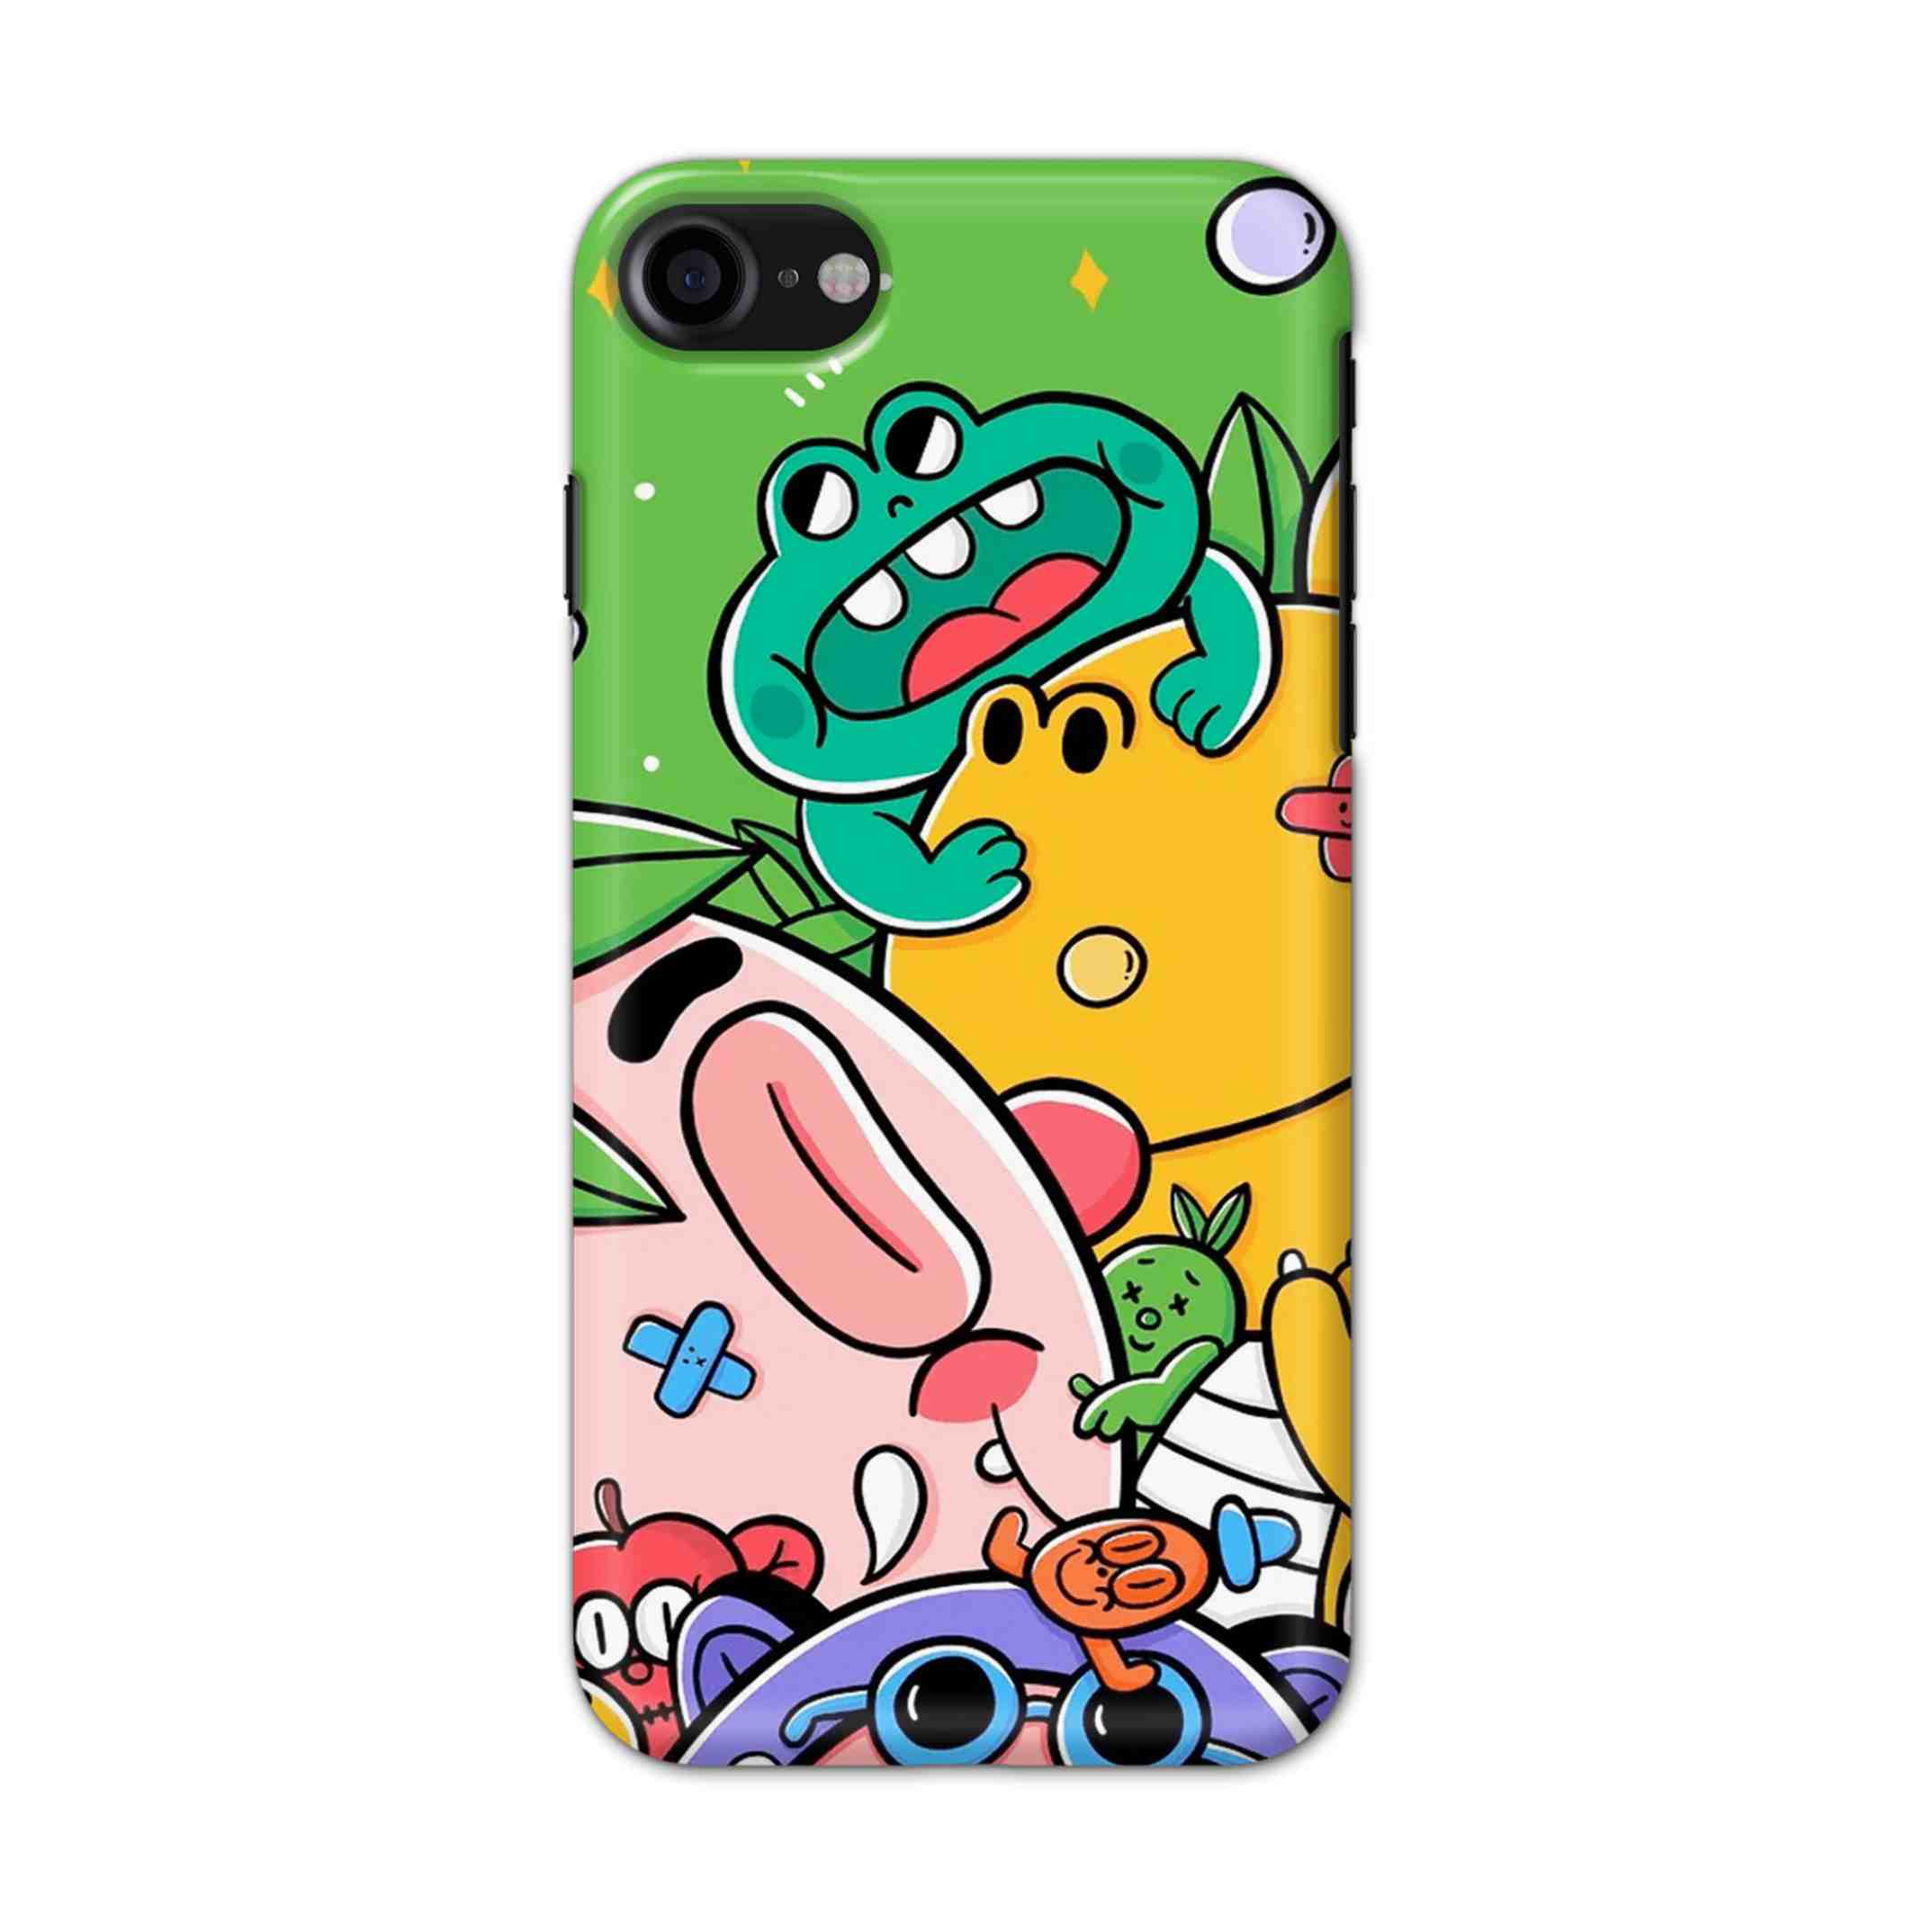 Buy Hello Feng San Hard Back Mobile Phone Case/Cover For iPhone 7 / 8 Online